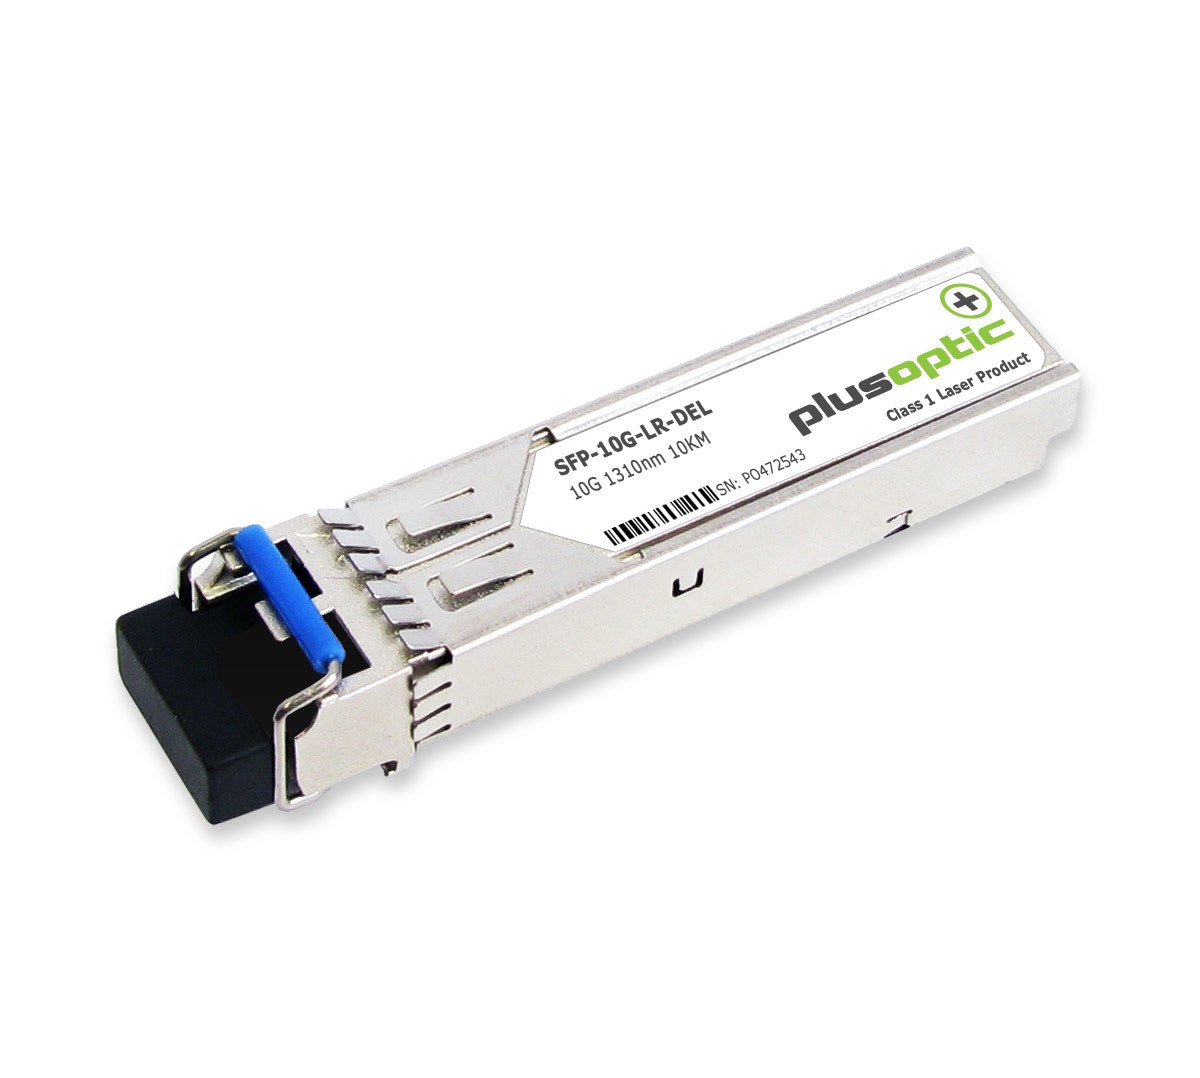 PlusOptic Dell Compatible (330-2404 407-10357 407-10464) 10G, SFP+, 1310NM, 10KM Transceiver, LC Connector For SMF With Dom | PlusOptic Sfp-10G-Lr-Del